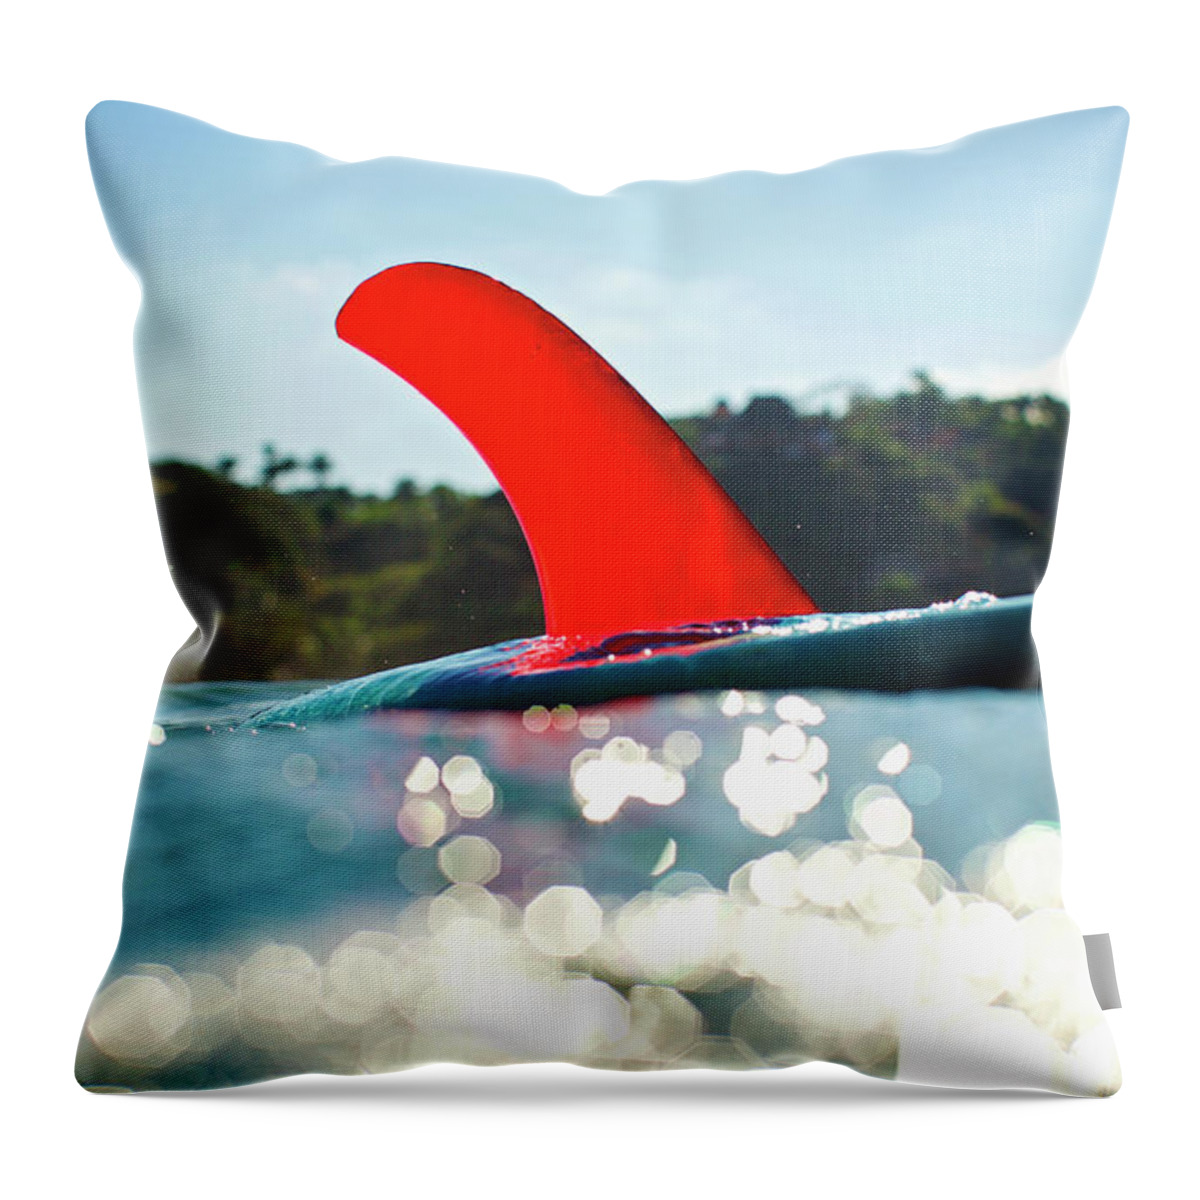 Surfing Throw Pillow featuring the photograph Red Fin by Nik West